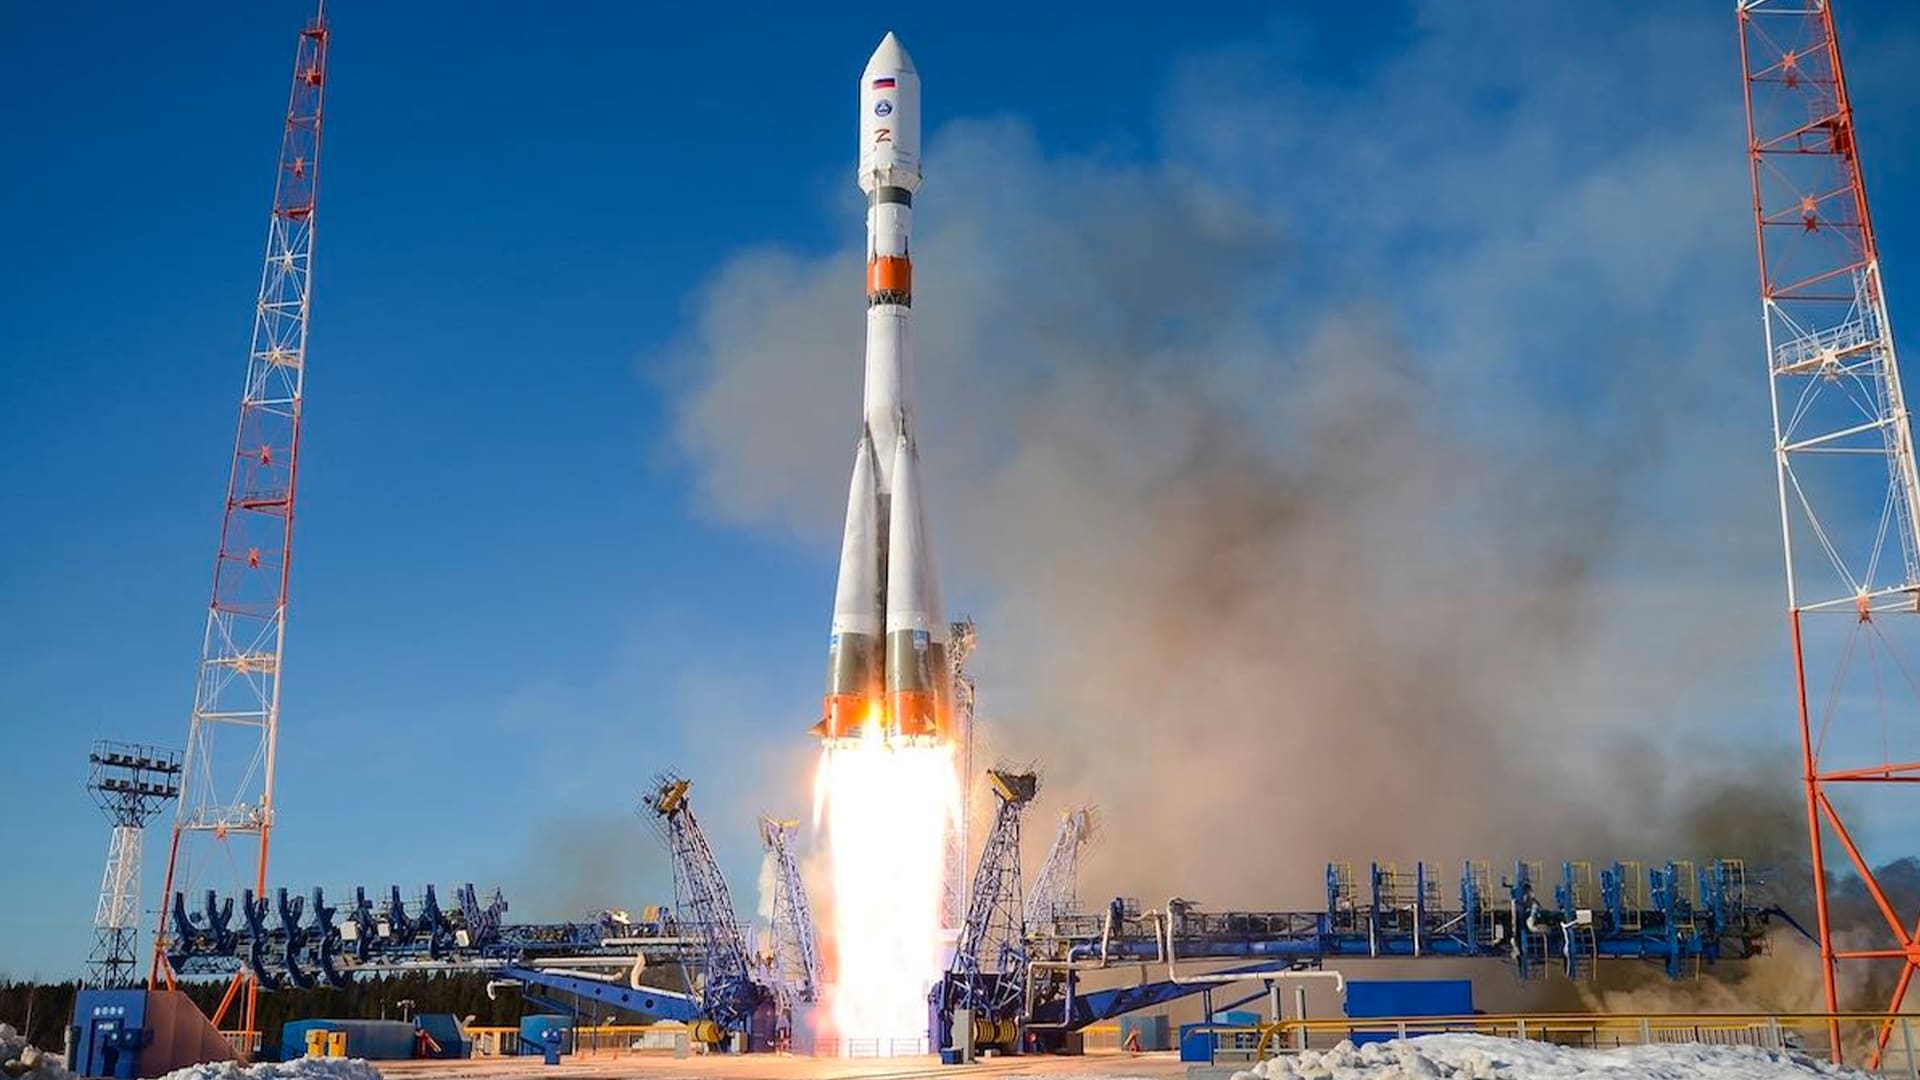 Cosmic Cash: Russia to let brands plaster rockets with ads, raise funds for space exploration